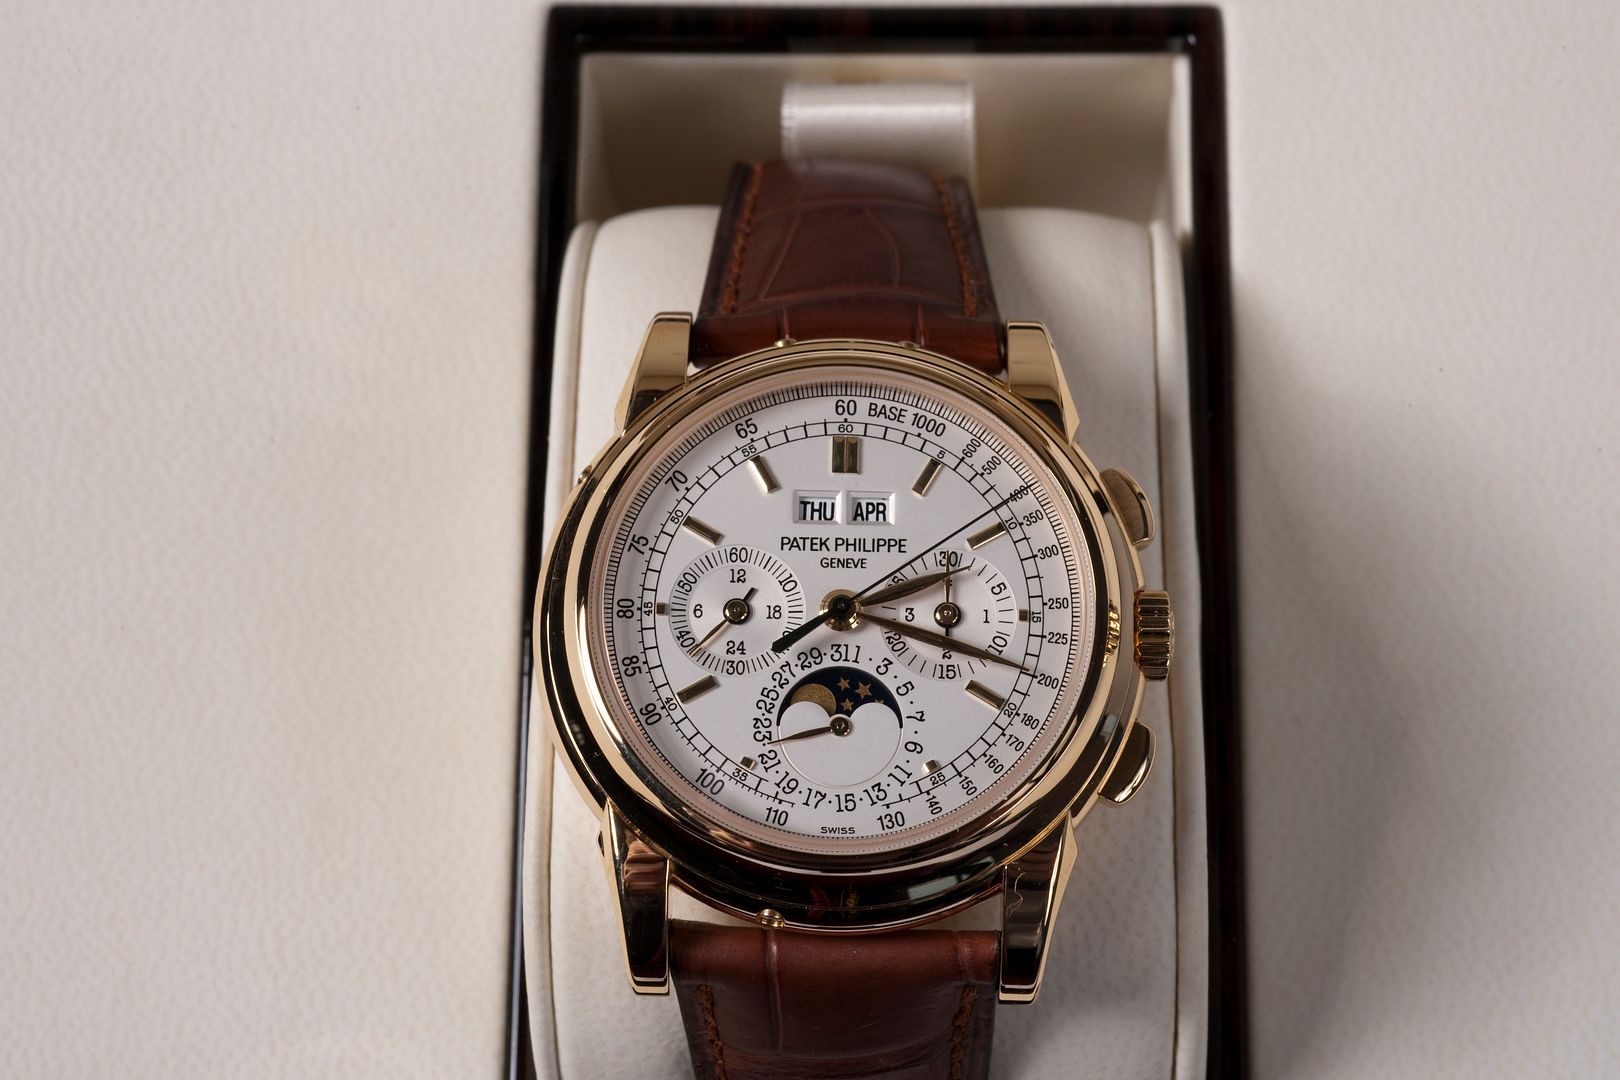 Patek Philippe 5970 - from owner's perspective